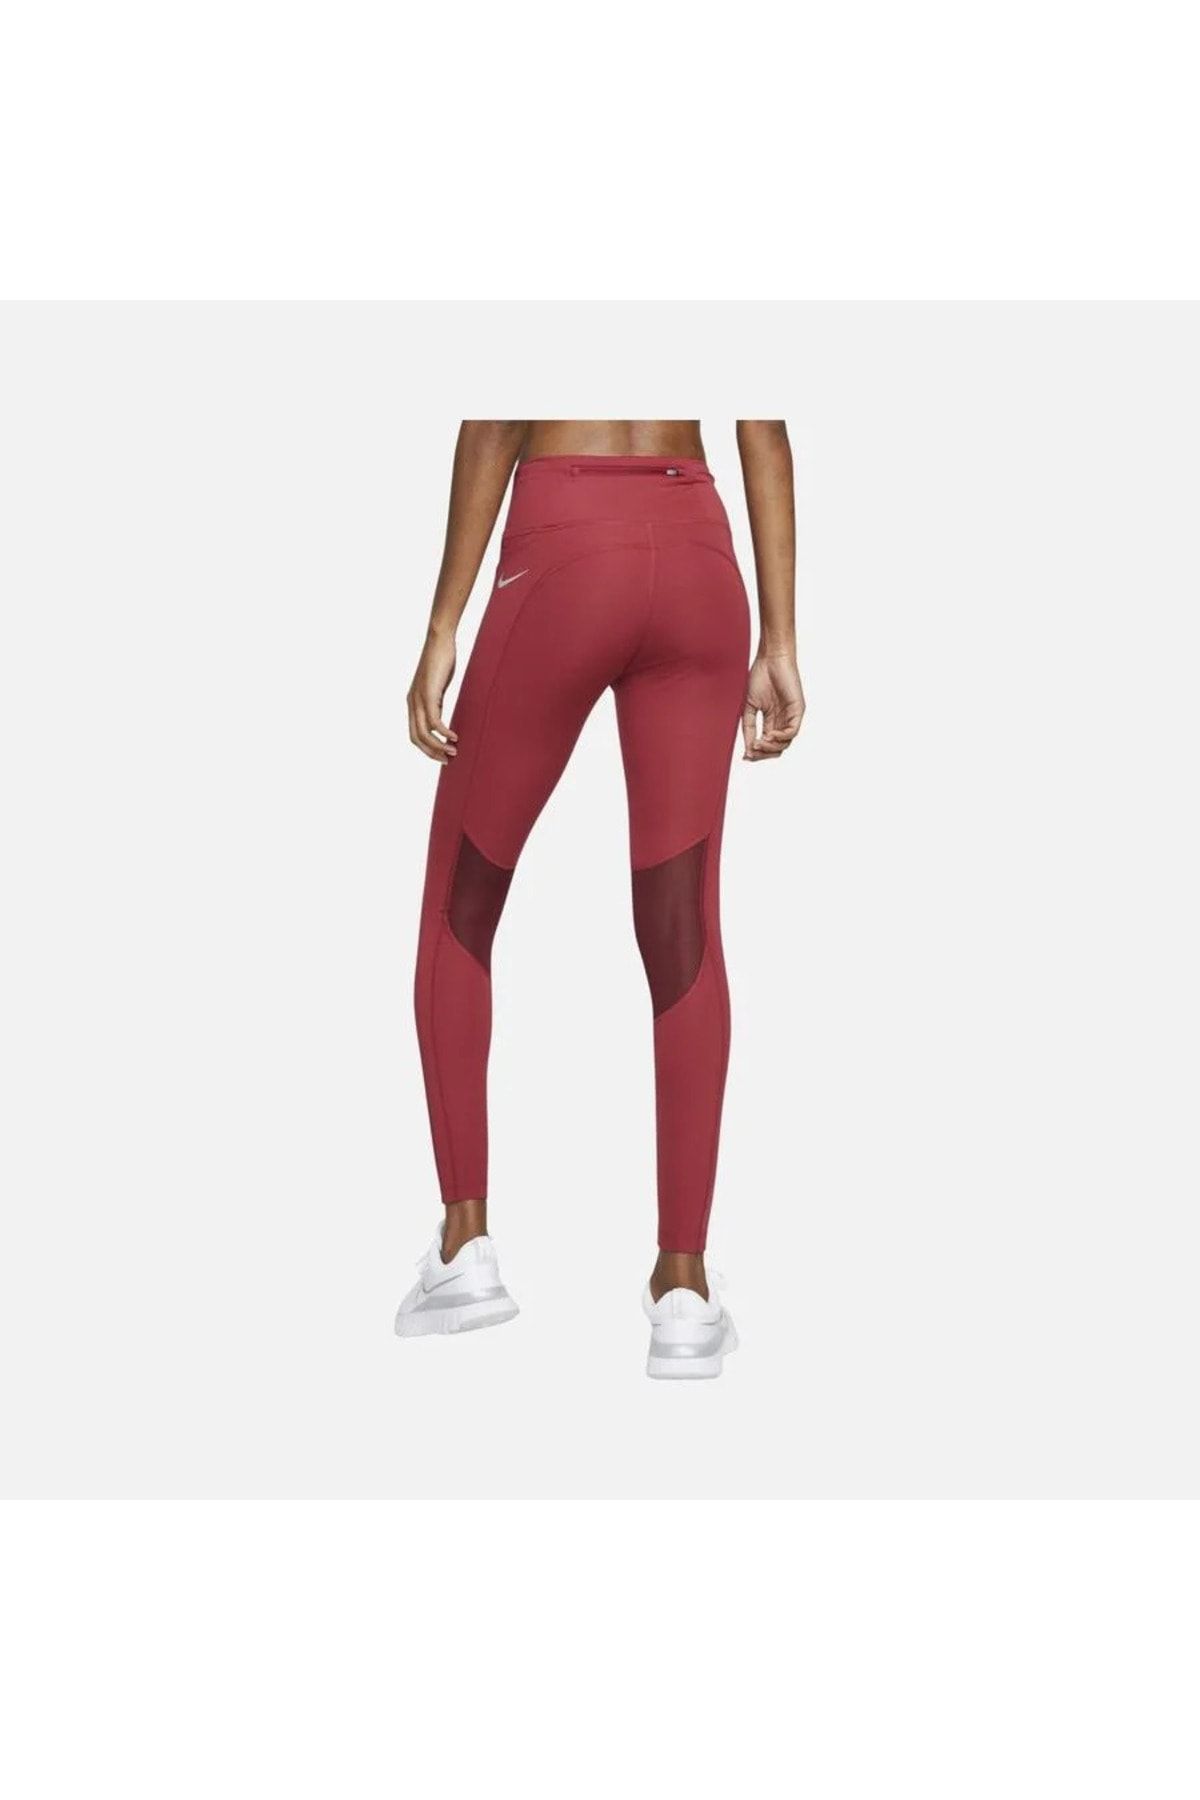 Nike Epic Fast Women's Running Tights